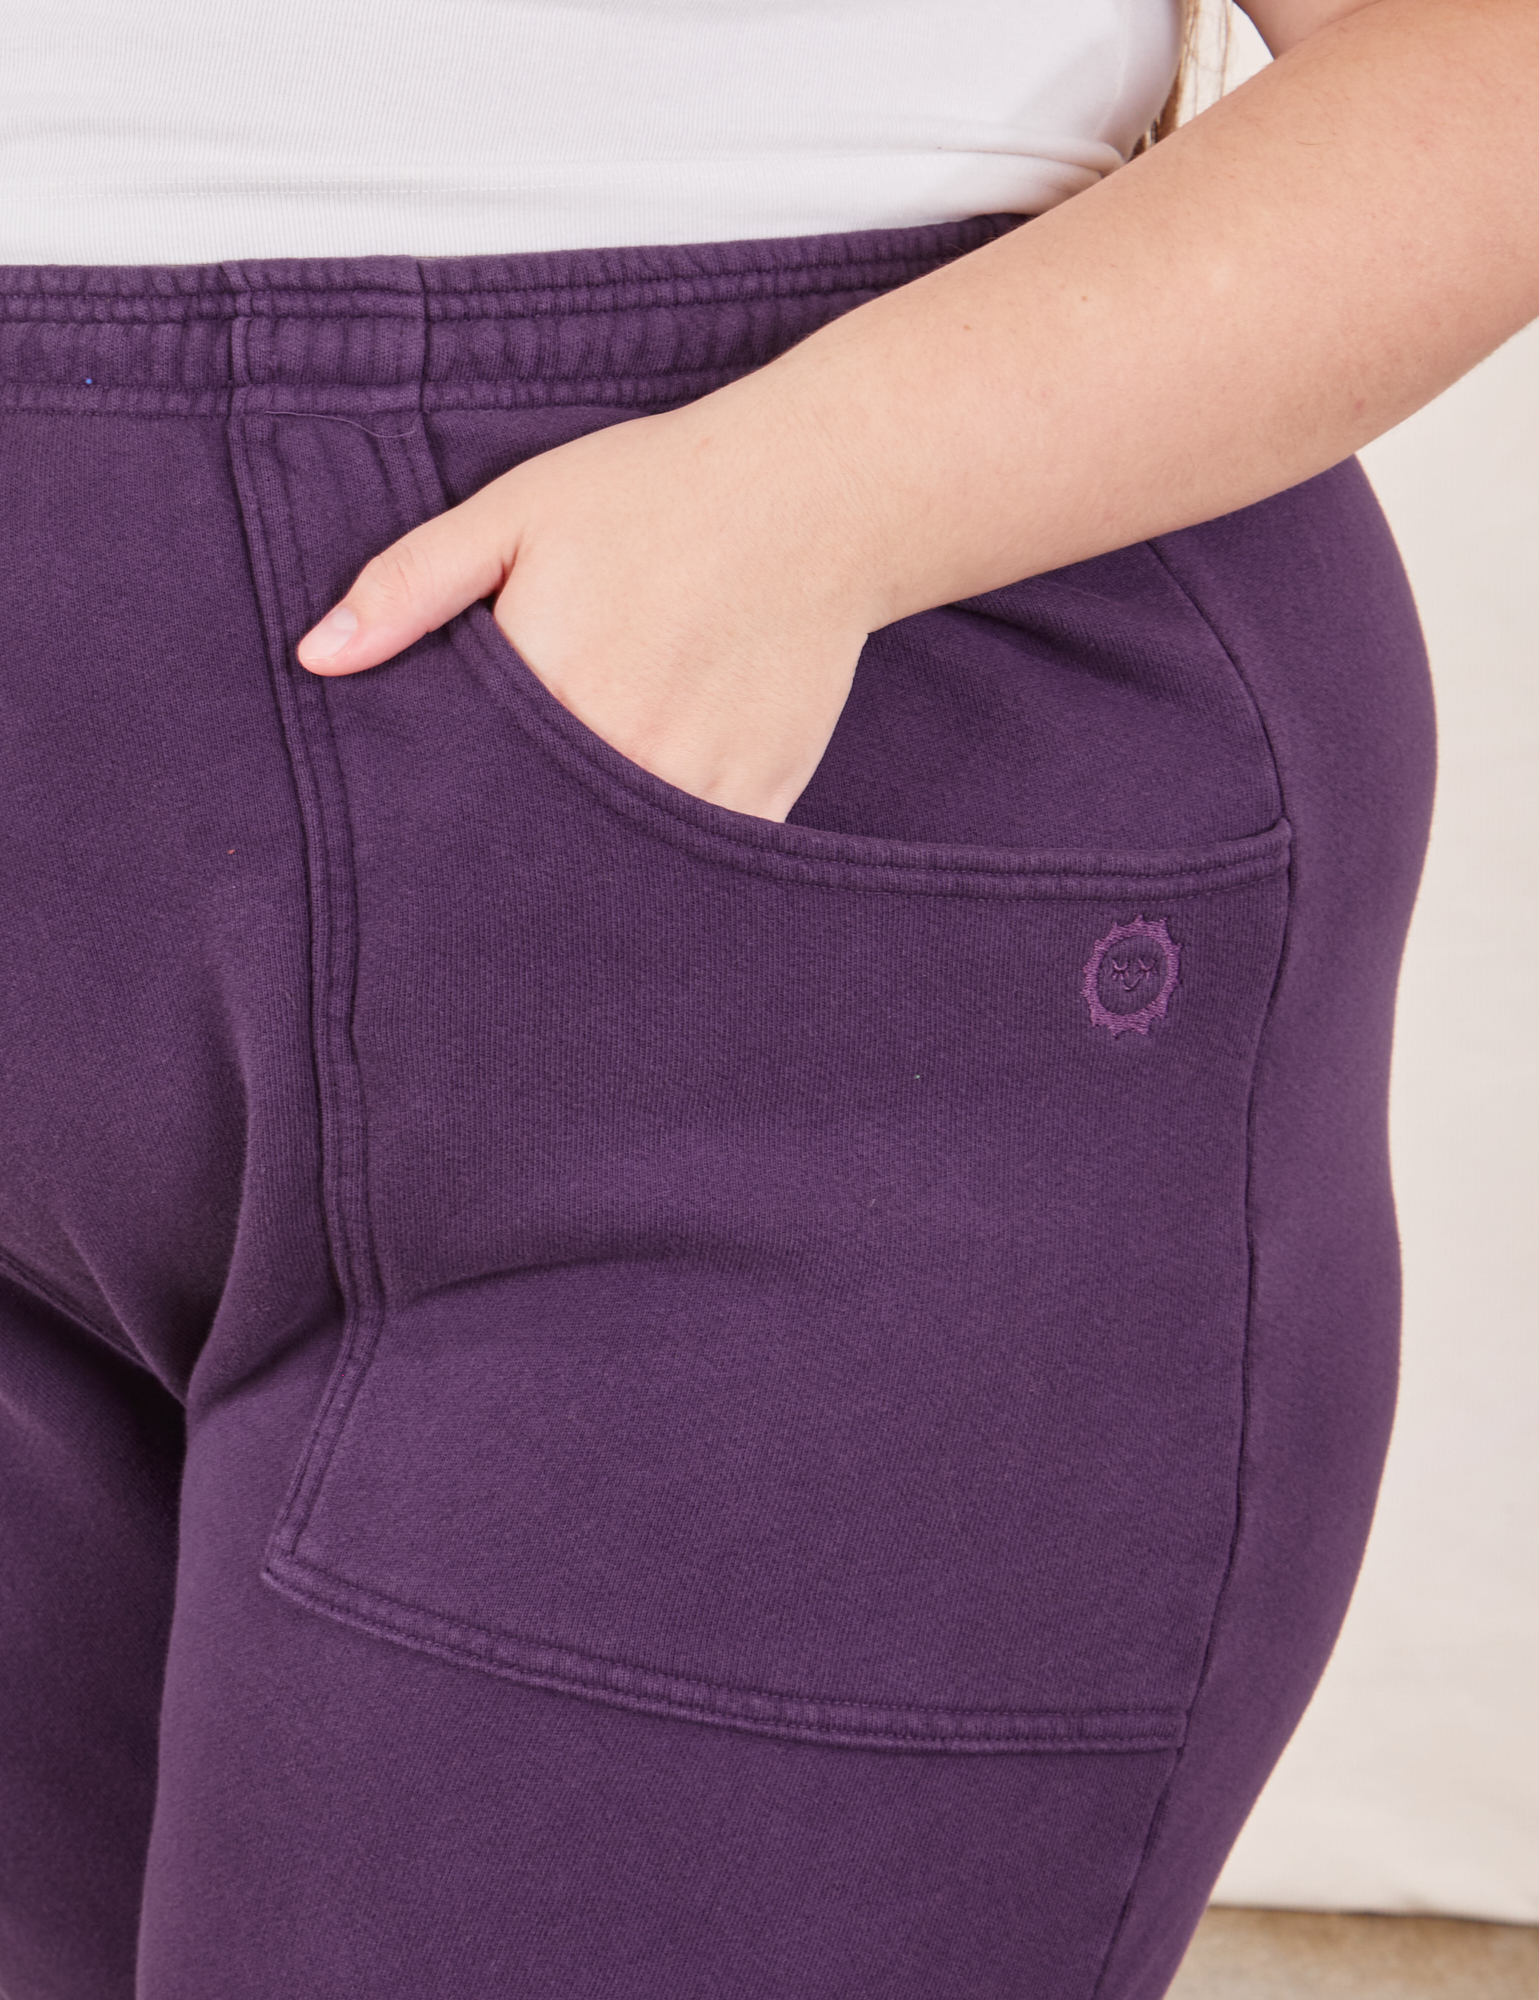 Cropped Rolled Cuff Sweatpants in Nebula Purple front pocket close up.  Marielena has her hand in the pocket.